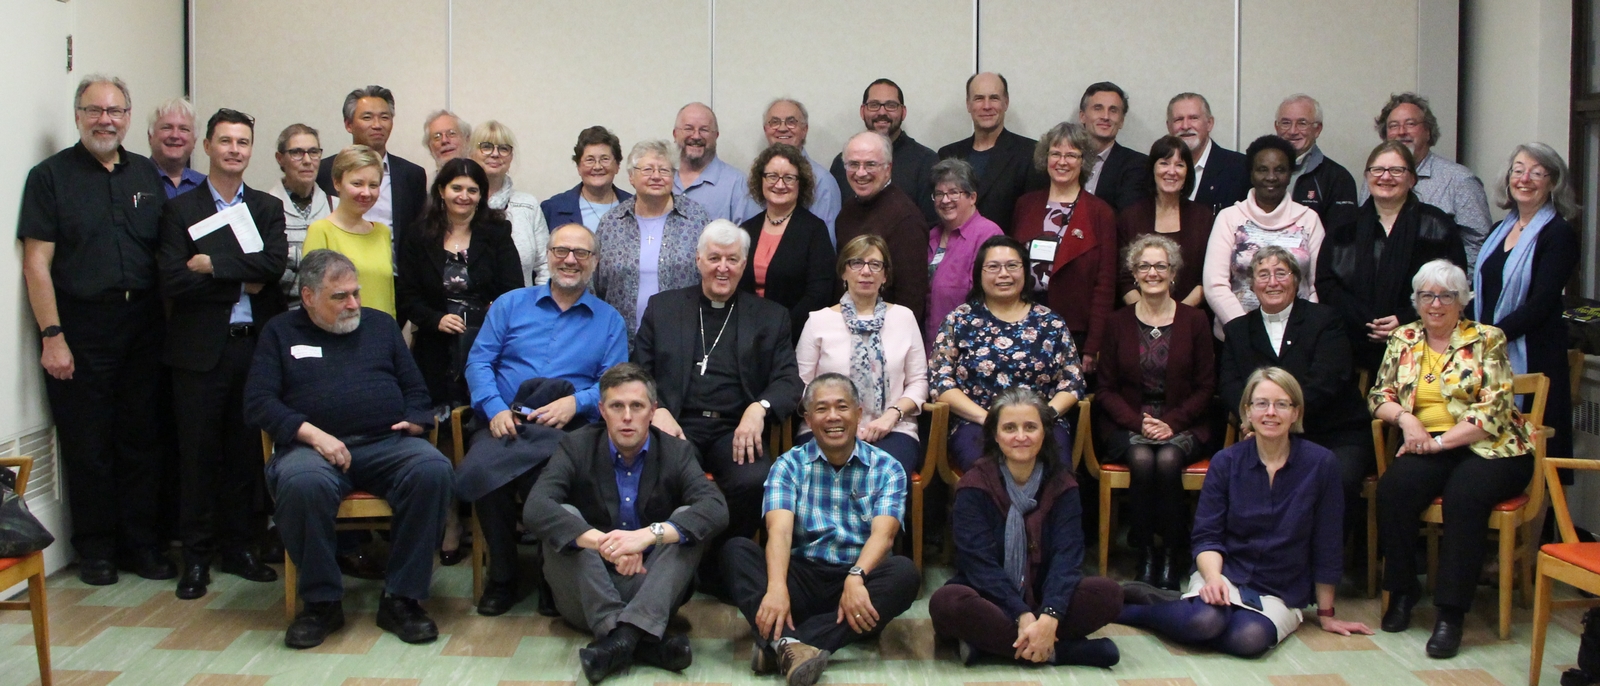 Participants in the 7th Canadian Forum on Inter-Church Dialogues, held in Montreal from October 12-13, 2018